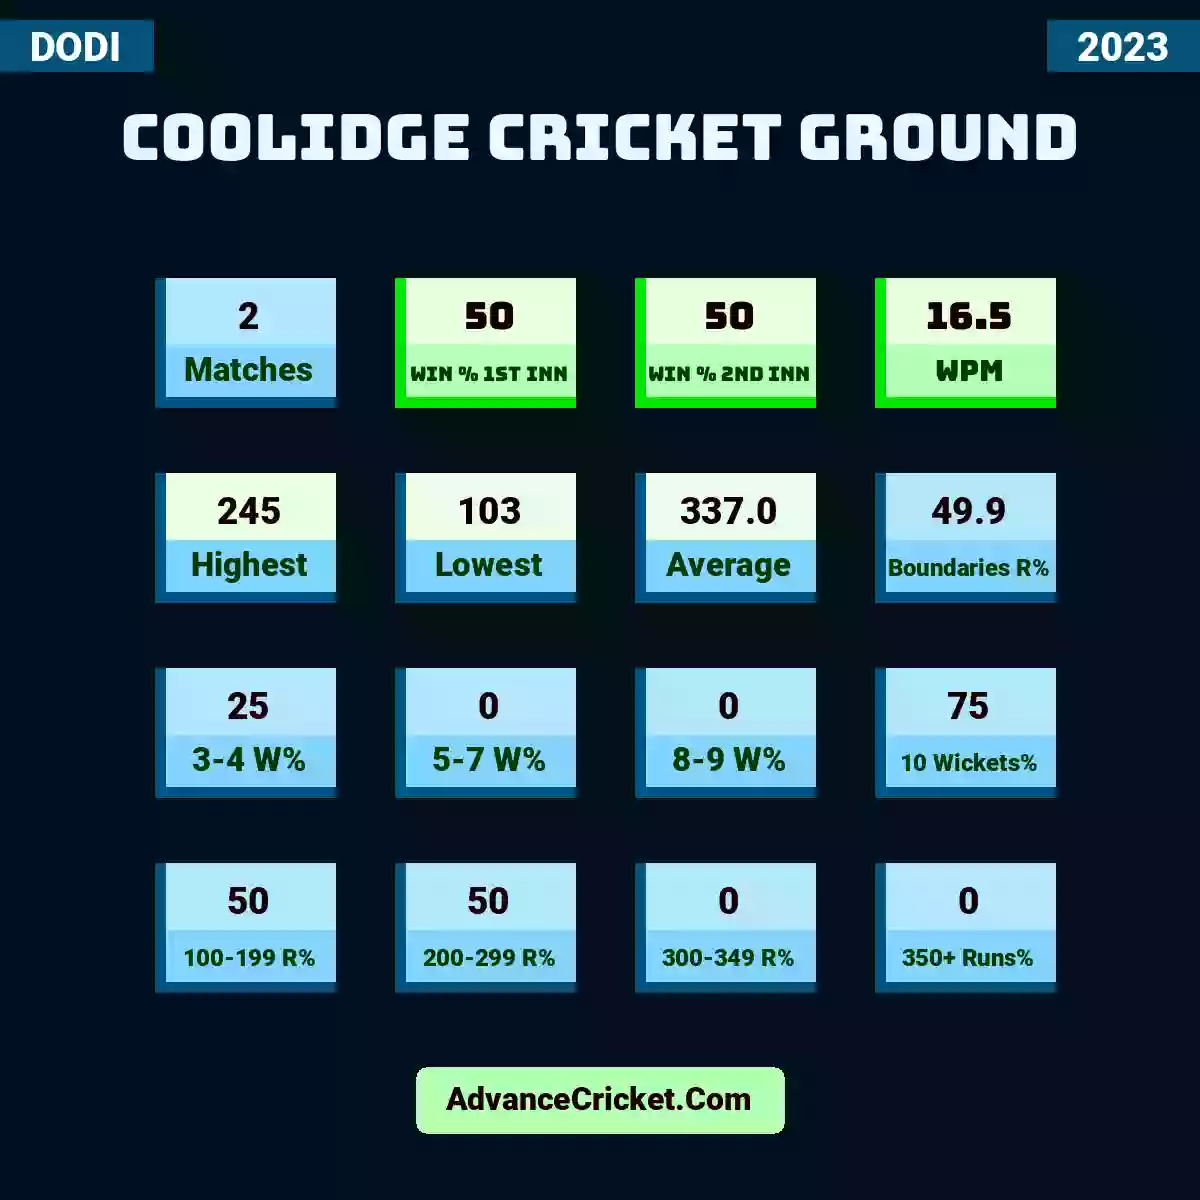 Image showing Coolidge Cricket Ground with Matches: 2, Win % 1st Inn: 50, Win % 2nd Inn: 50, WPM: 16.5, Highest: 245, Lowest: 103, Average: 337.0, Boundaries R%: 49.9, 3-4 W%: 25, 5-7 W%: 0, 8-9 W%: 0, 10 Wickets%: 75, 100-199 R%: 50, 200-299 R%: 50, 300-349 R%: 0, 350+ Runs%: 0.